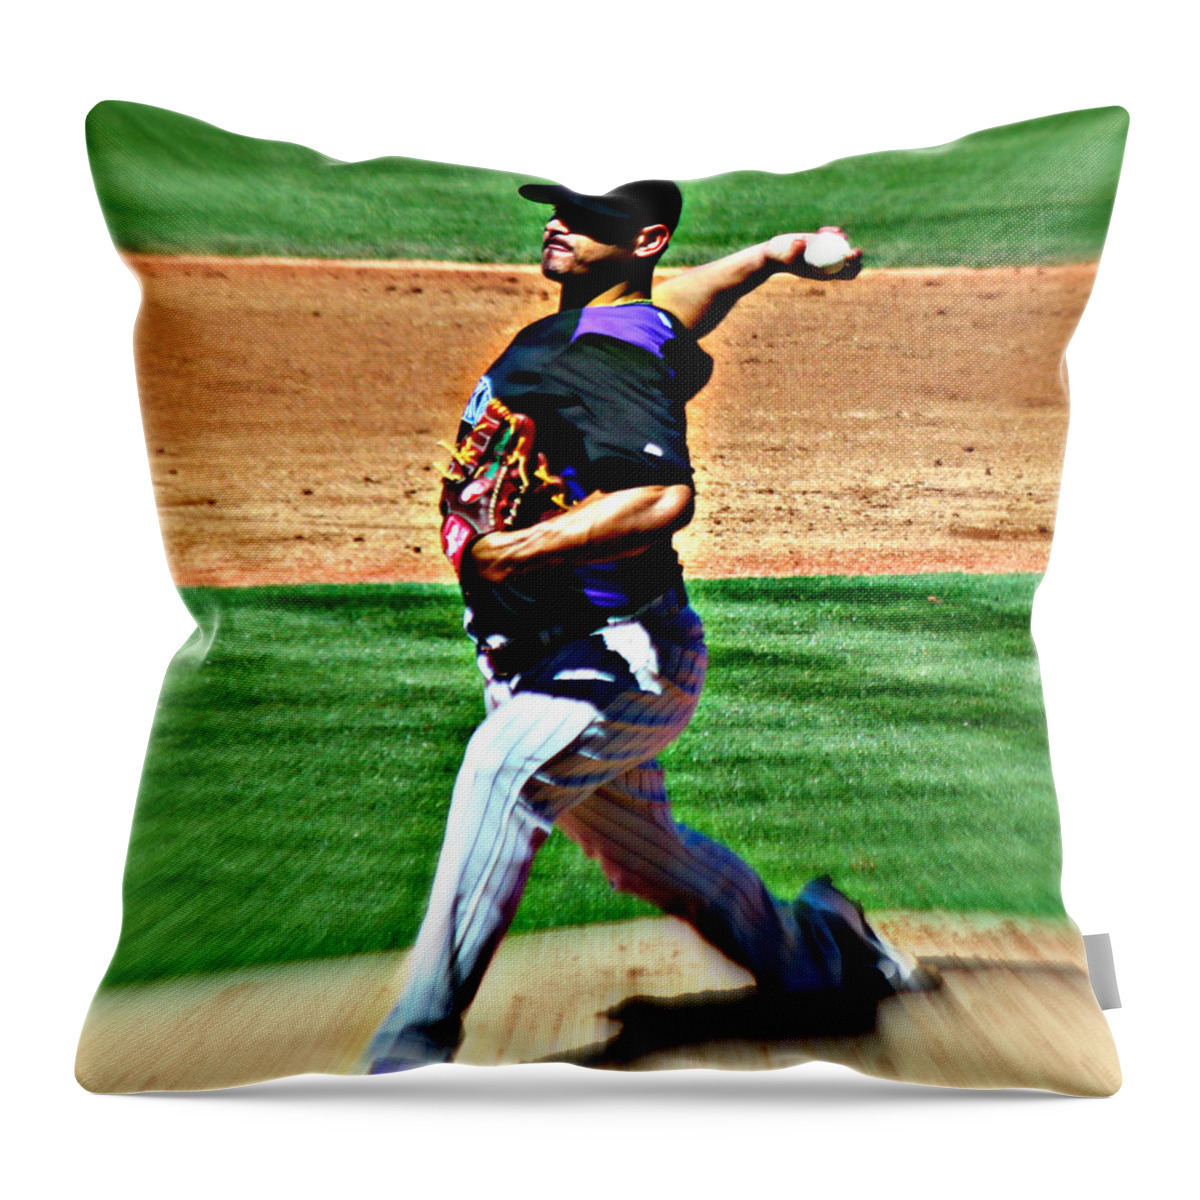 Baseball Throw Pillow featuring the photograph Rockies No 56 Guillermo Moscoso by Jo Sheehan